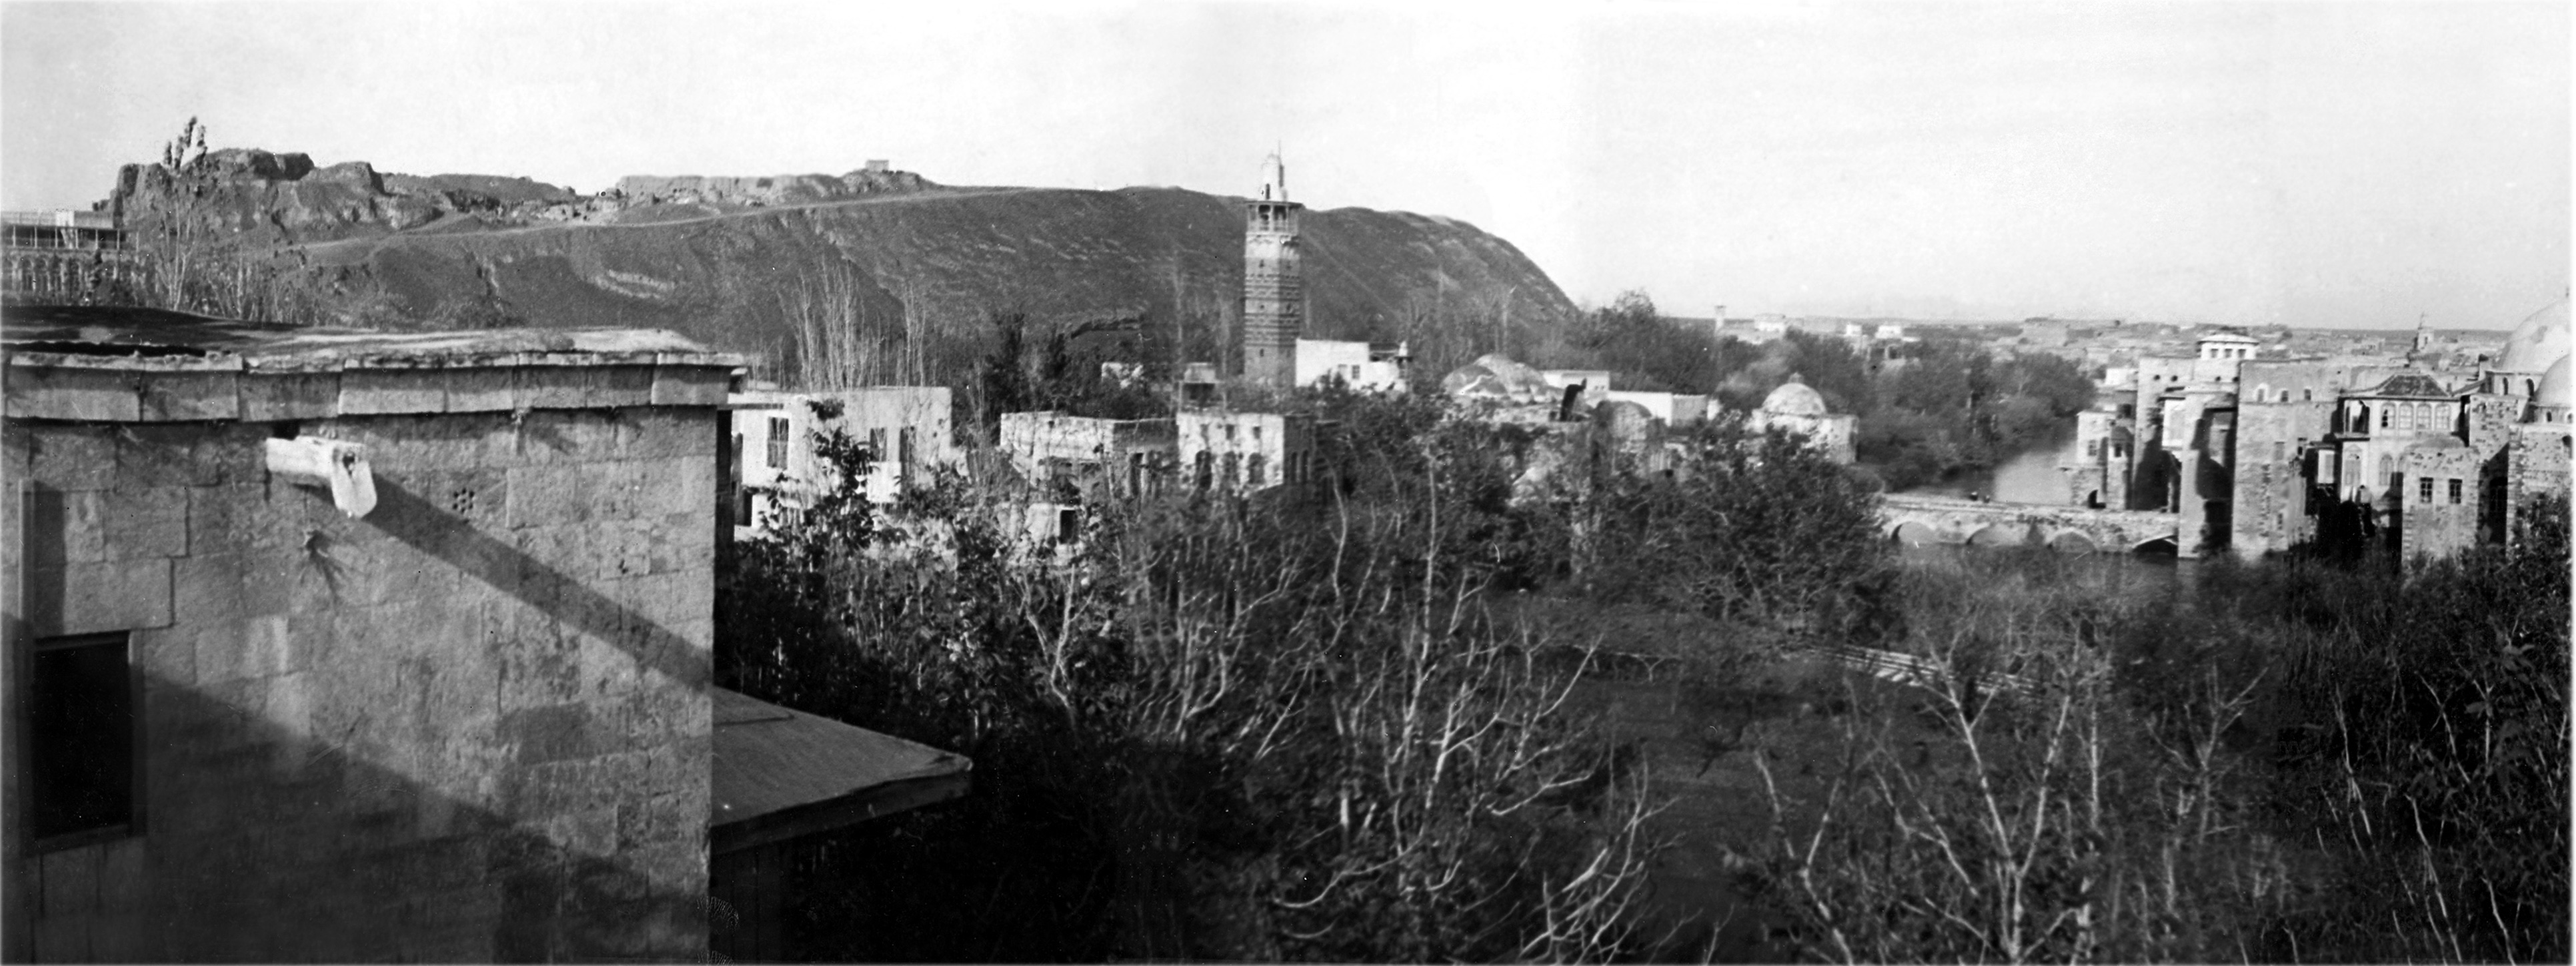  Hama - <p><strong>Panorama Featuring Hama Citadel and Al-Kilaniyya Quarter</strong></p><p>An image extracted from the previous panorama highlights the Citadel, the minaret of An-Nuri Mosque, Al-Sultan Bathhouse, Al-Kilaniyya bridge, and the Al-Kilaniyya quarter.</p>